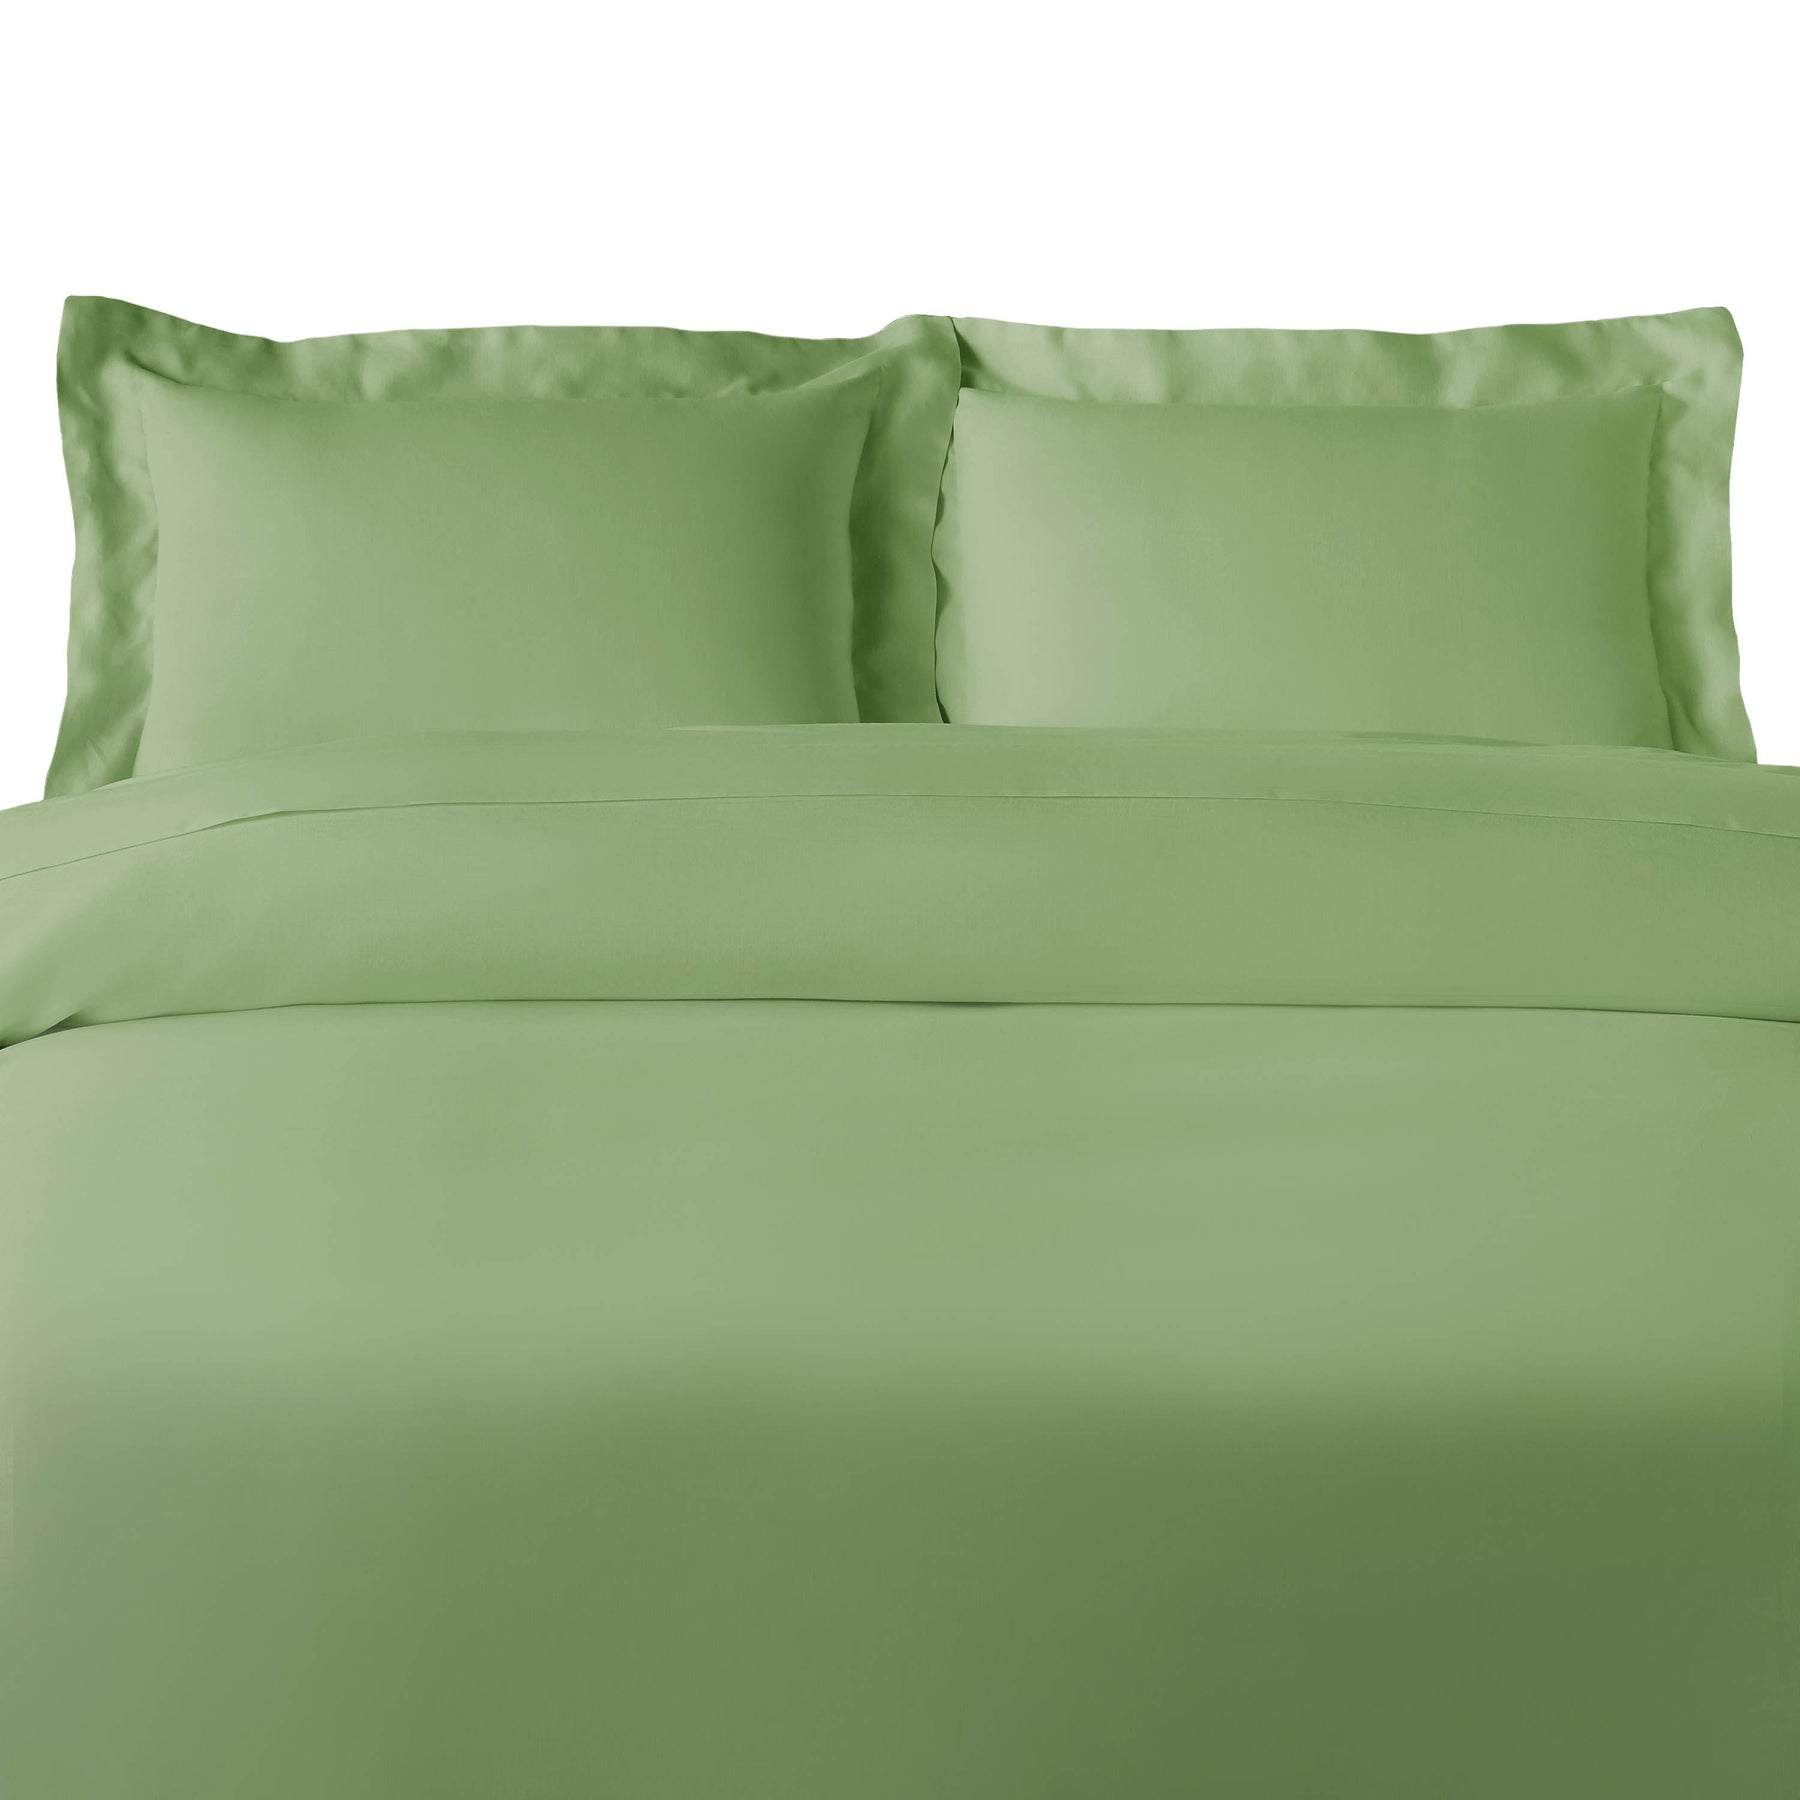 100% Rayon From Bamboo 300 Thread Count Solid Duvet Cover Set - Sage